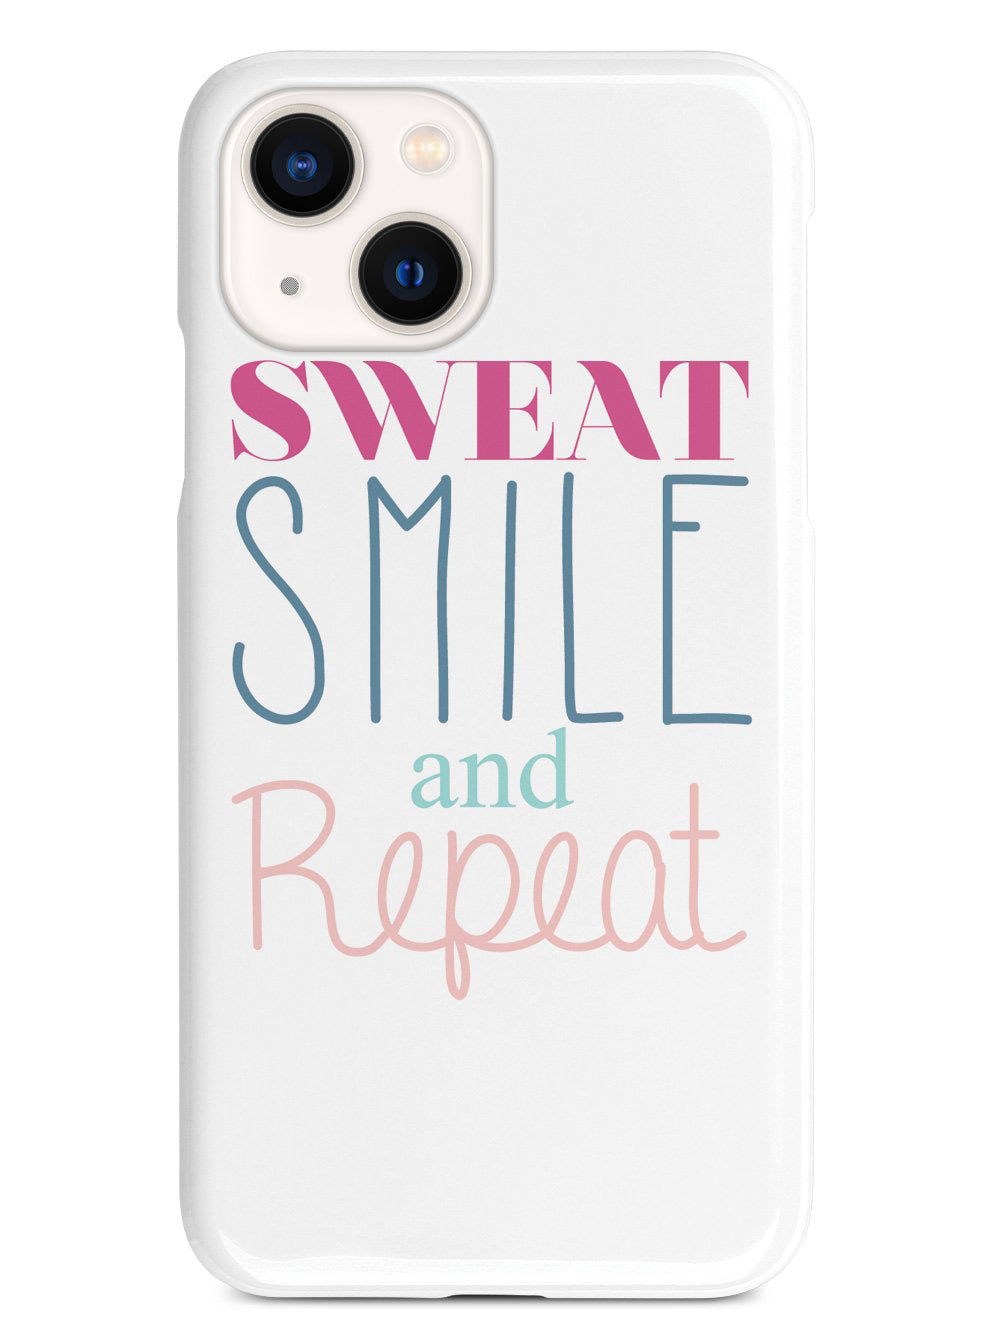 Sweat, Smile, Repeat, Gym Work Out Case